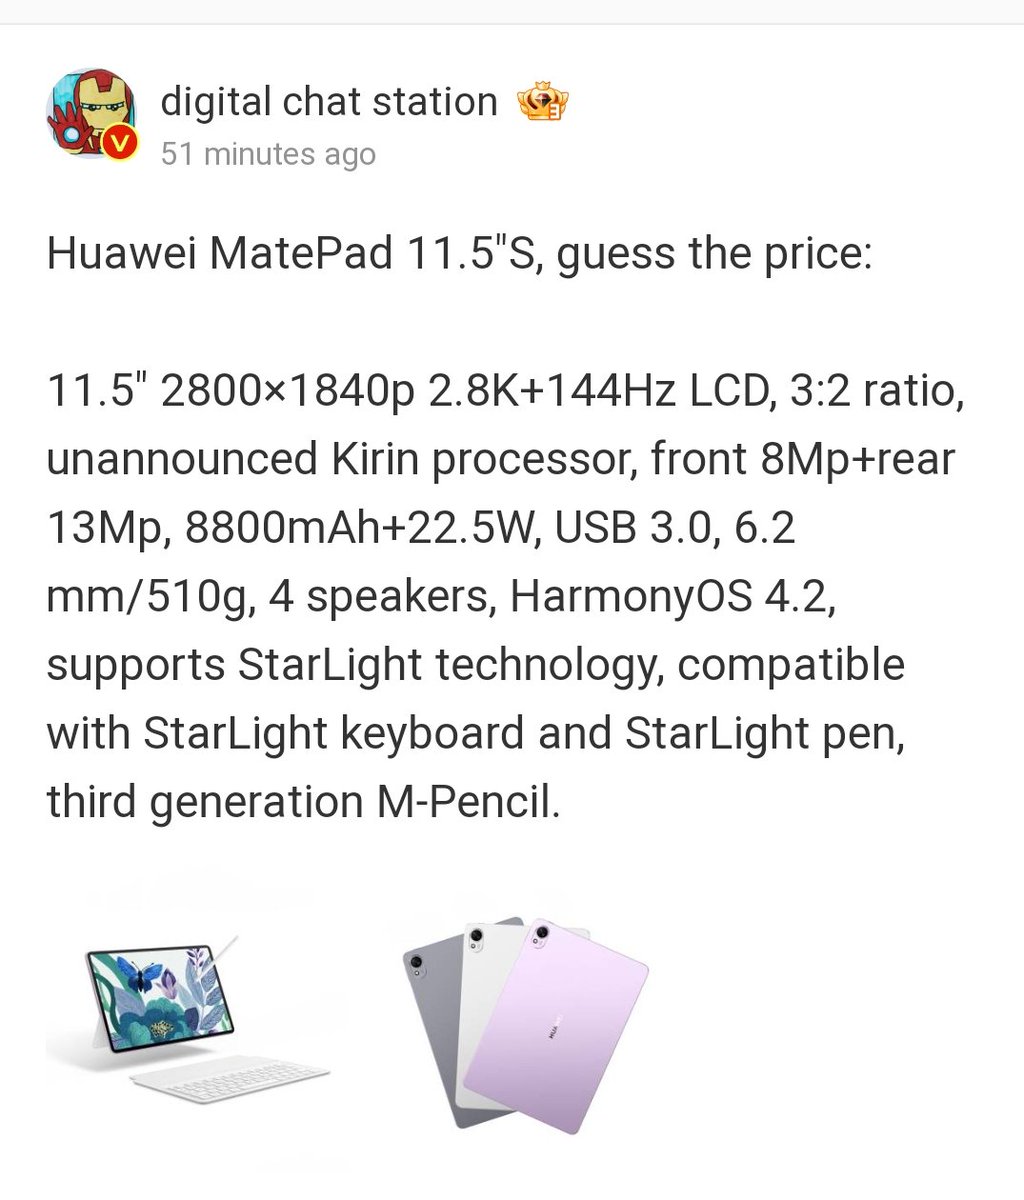 Hmmm, DCS also doesn't know the information about the Kirin chipset on the Huawei Matepad 11.5'S. Is it another surprise?